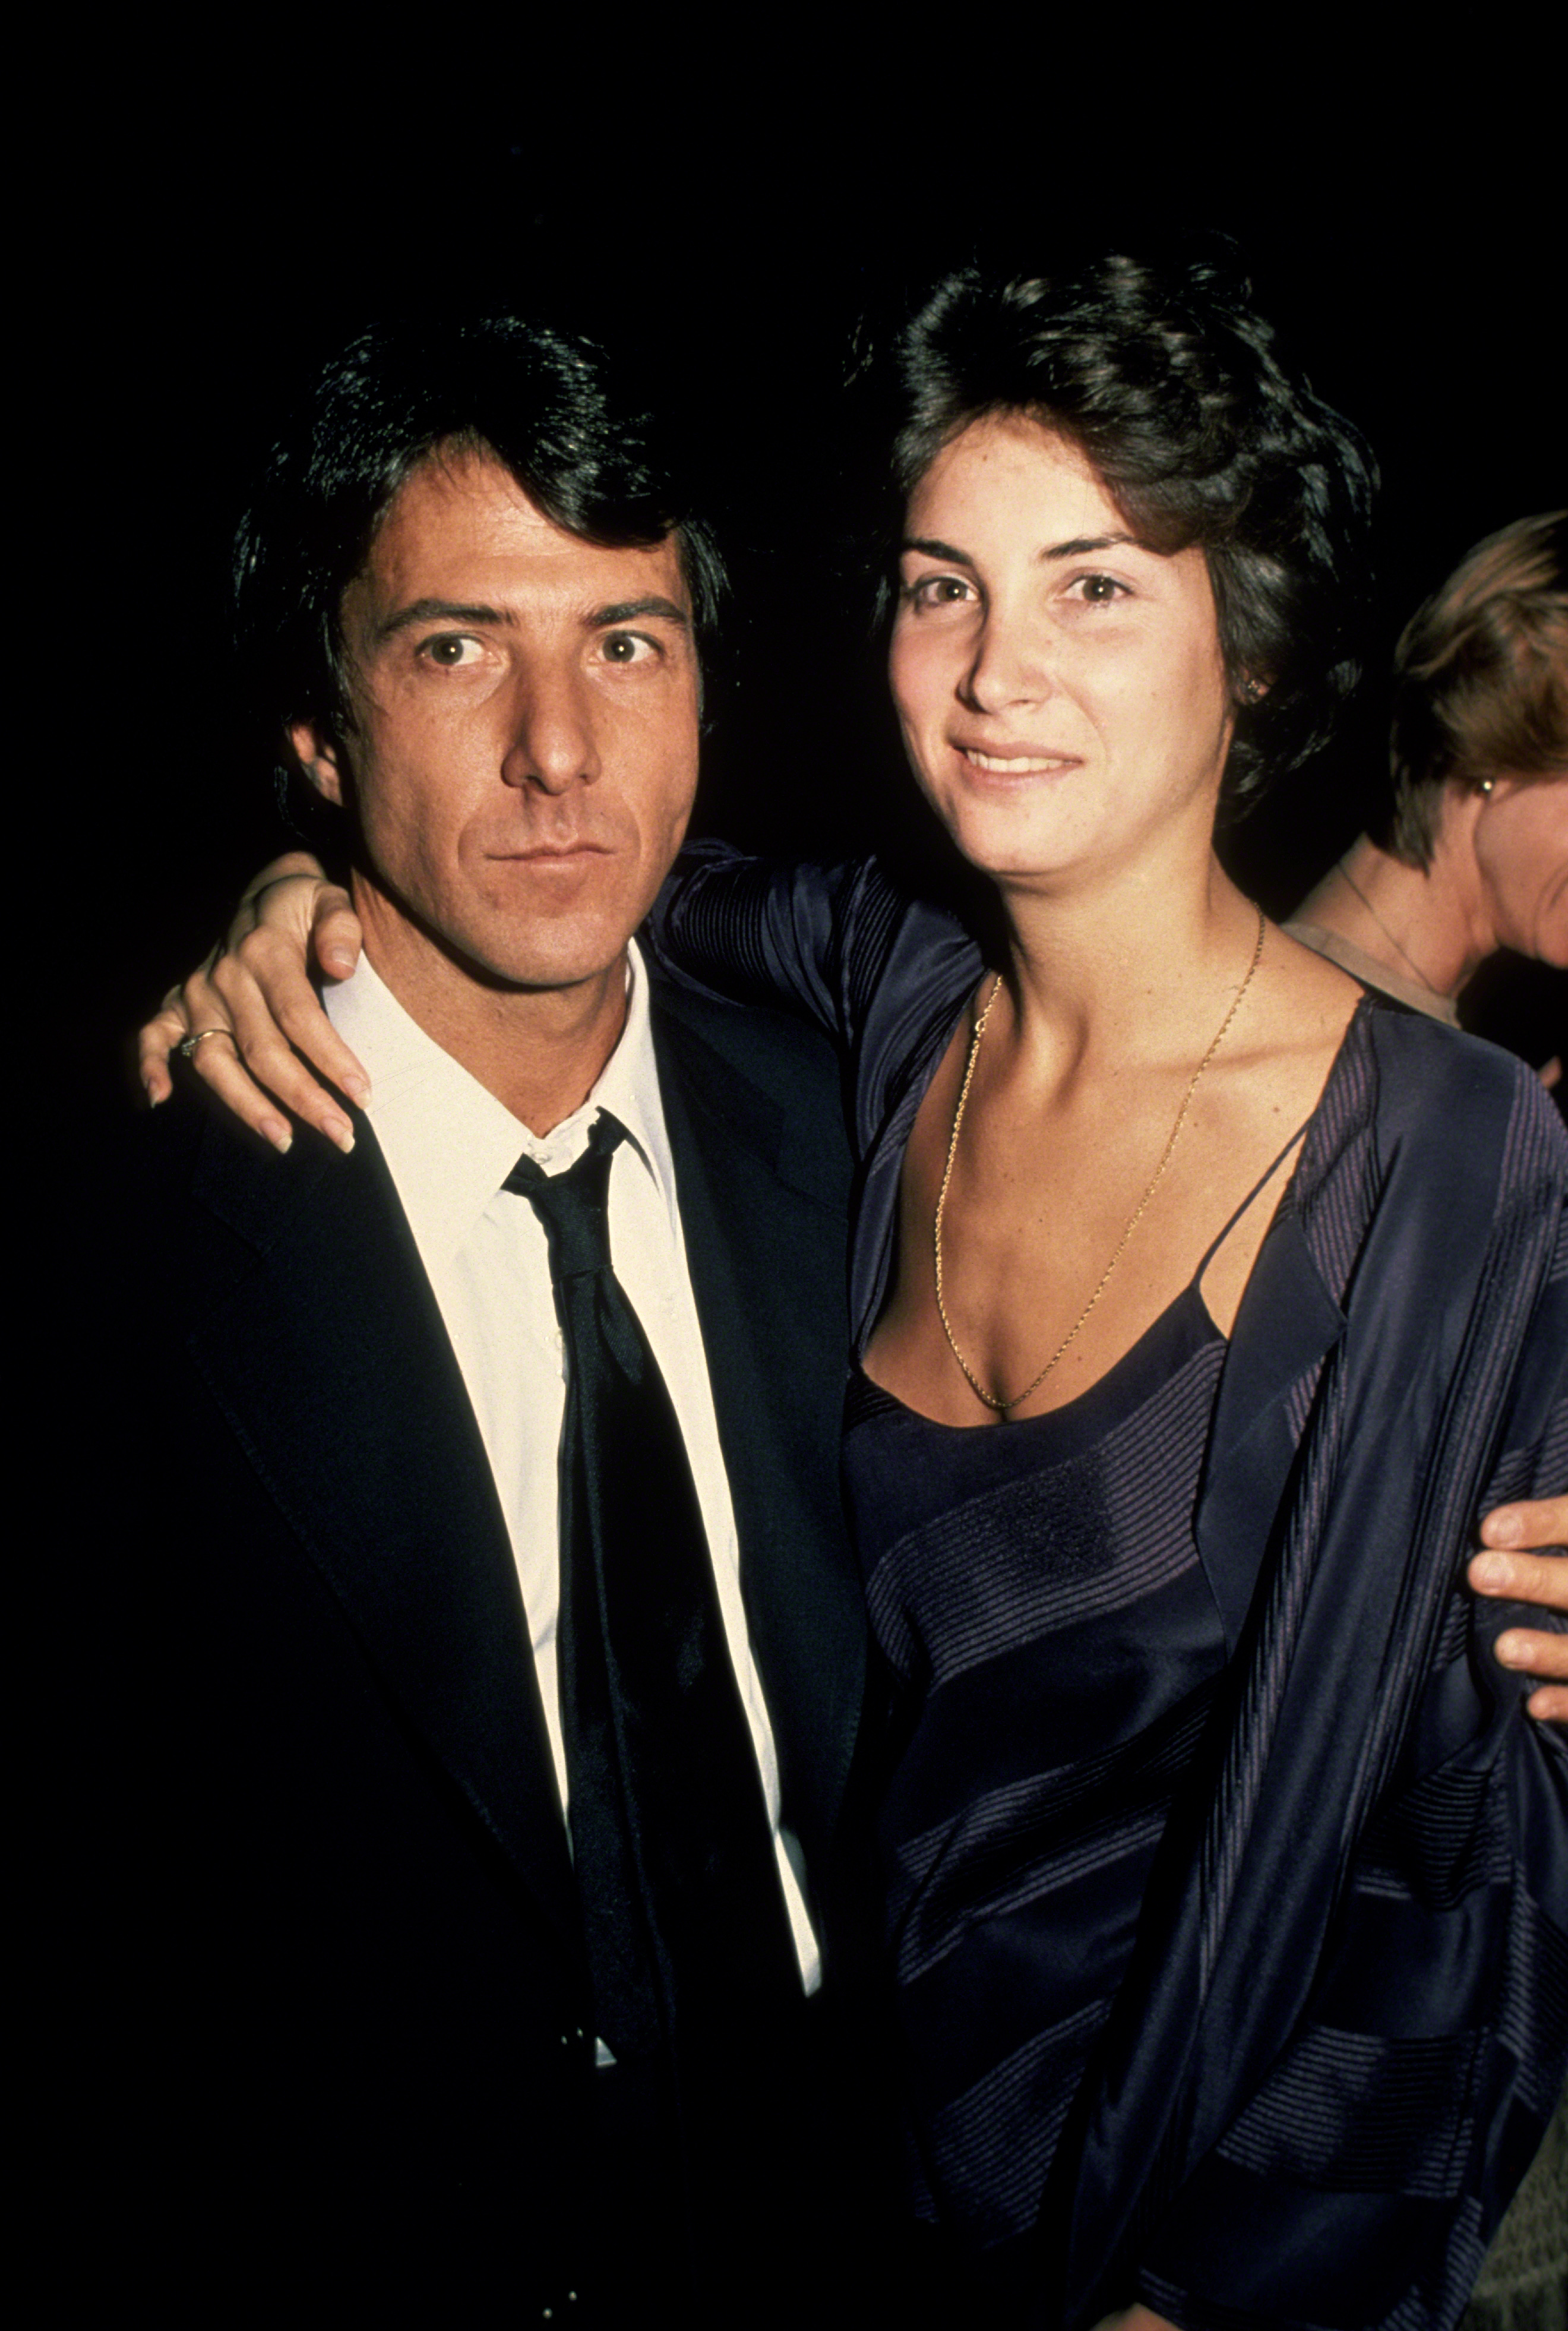 The actor and the woman in New York City in 1979. | Source: Getty Images